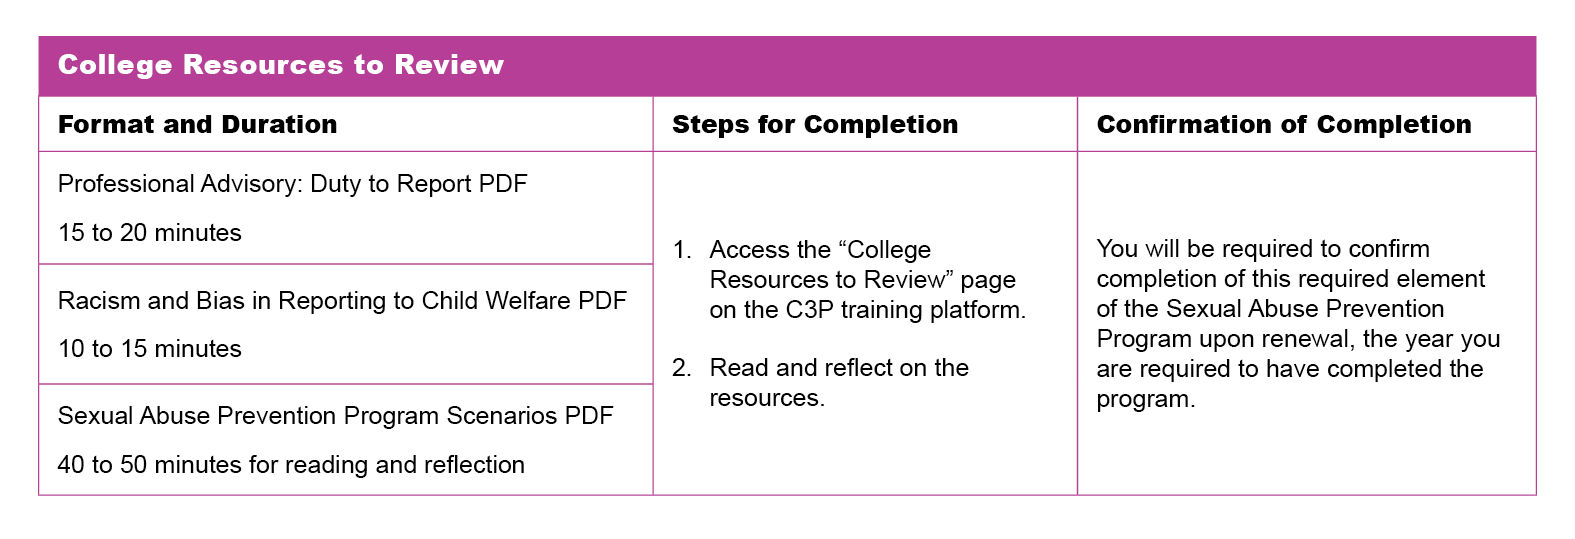 A table that explains the format and duration, steps for completion and confirmation of completion for the College Resources to Review.